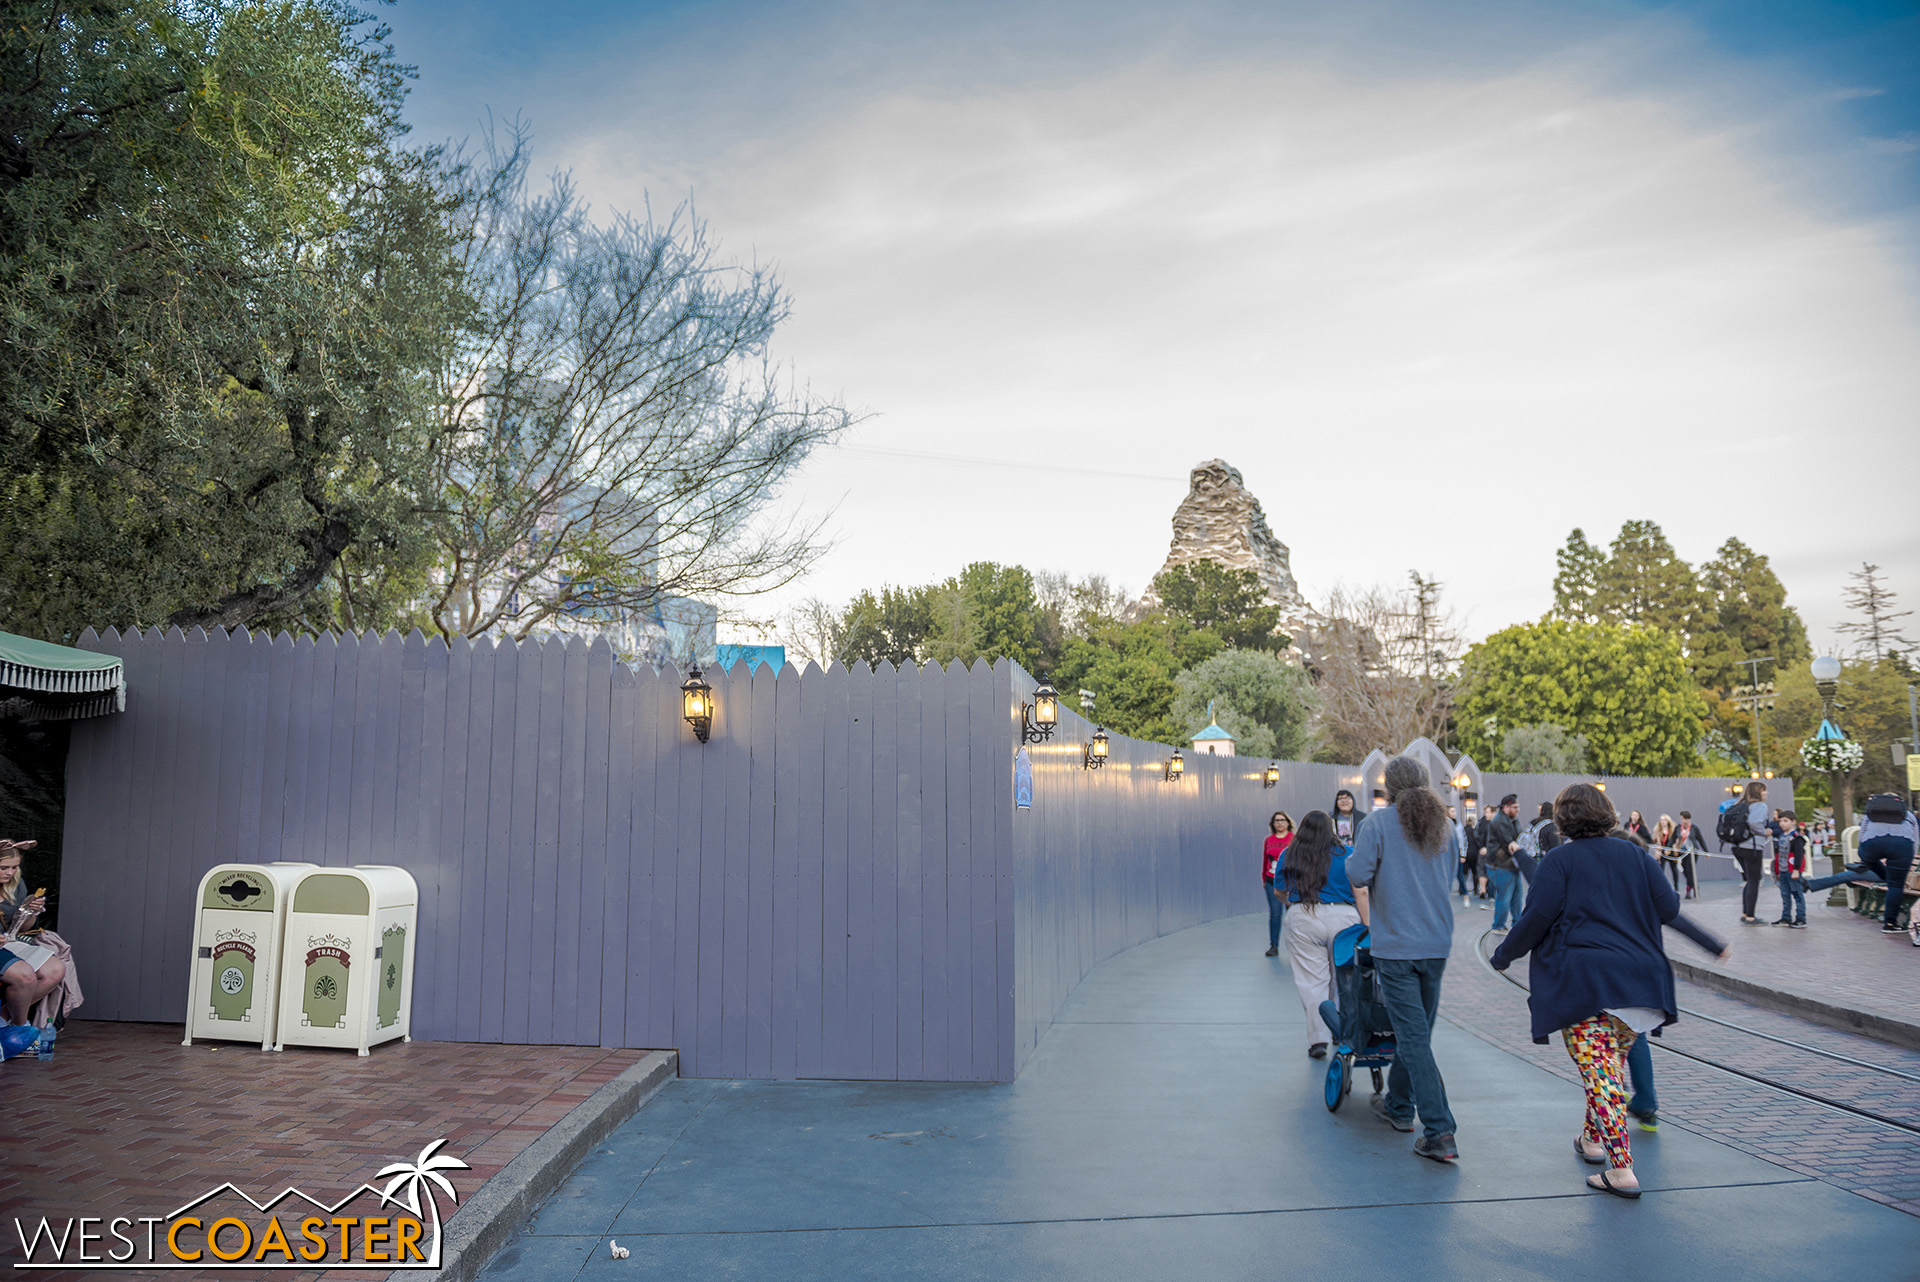  The work walls have been adjusted a bit to block the entrance into Fantasy Faire.  The lane from the Frontierland entrance must be used instead. 